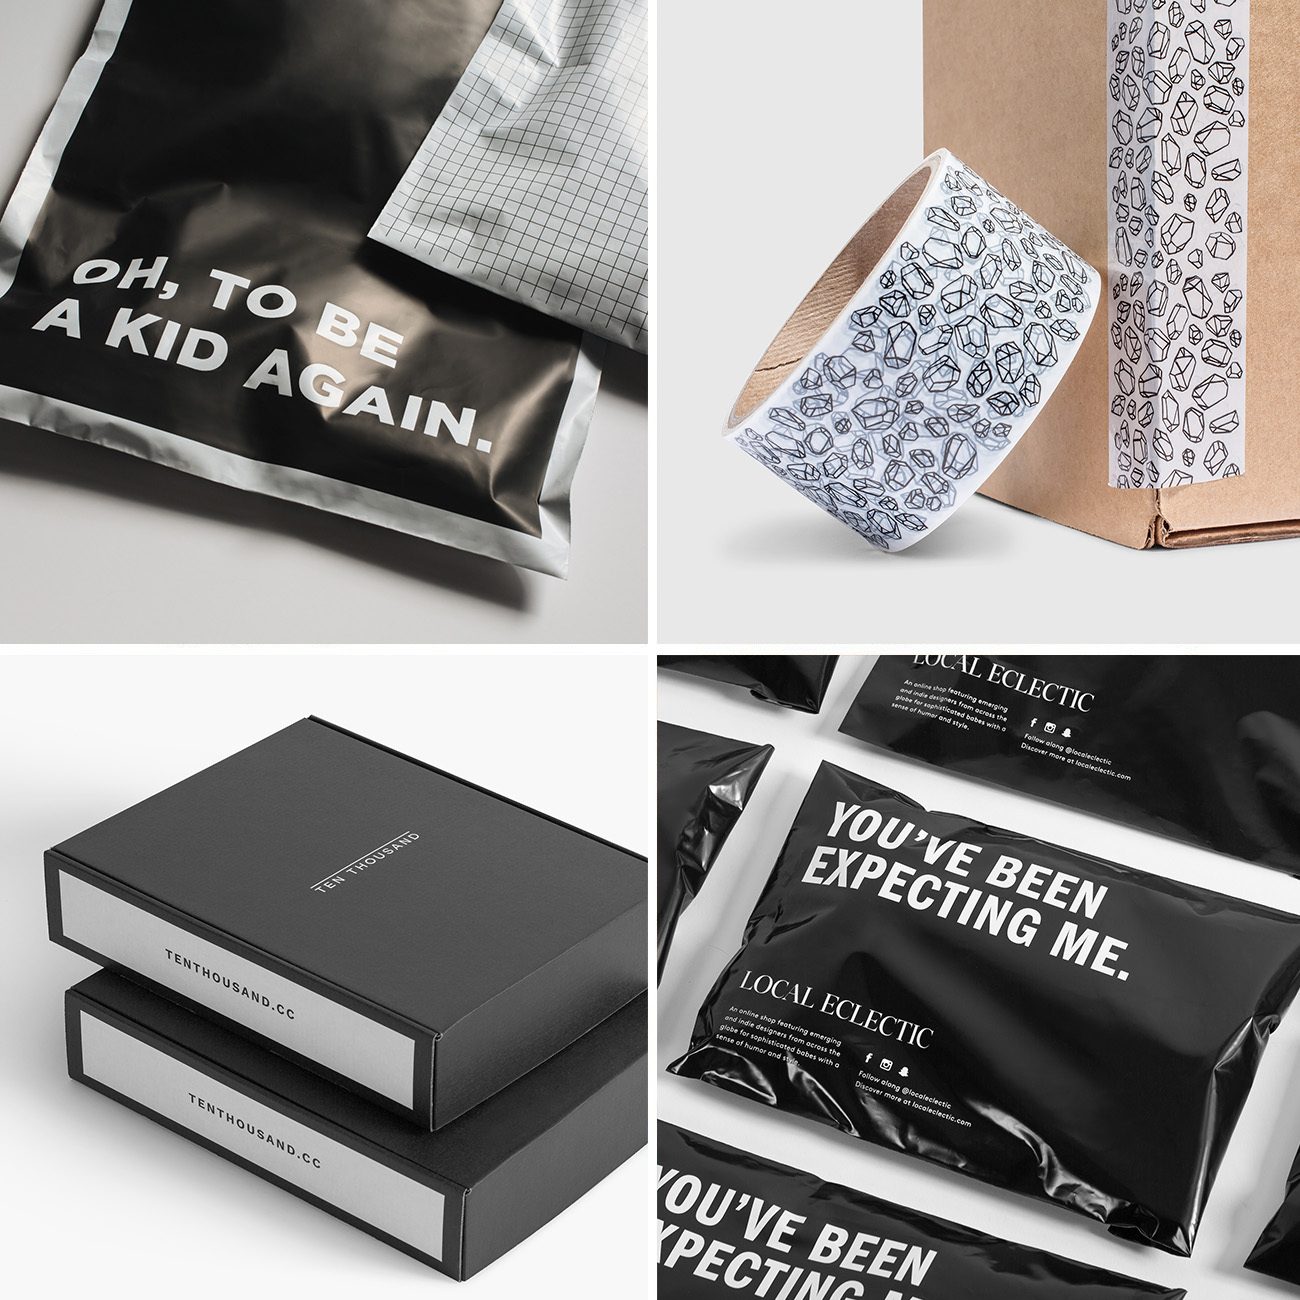 Photos via: Lumi 90 Ideas to Spruce Up Your Holiday Packaging Design